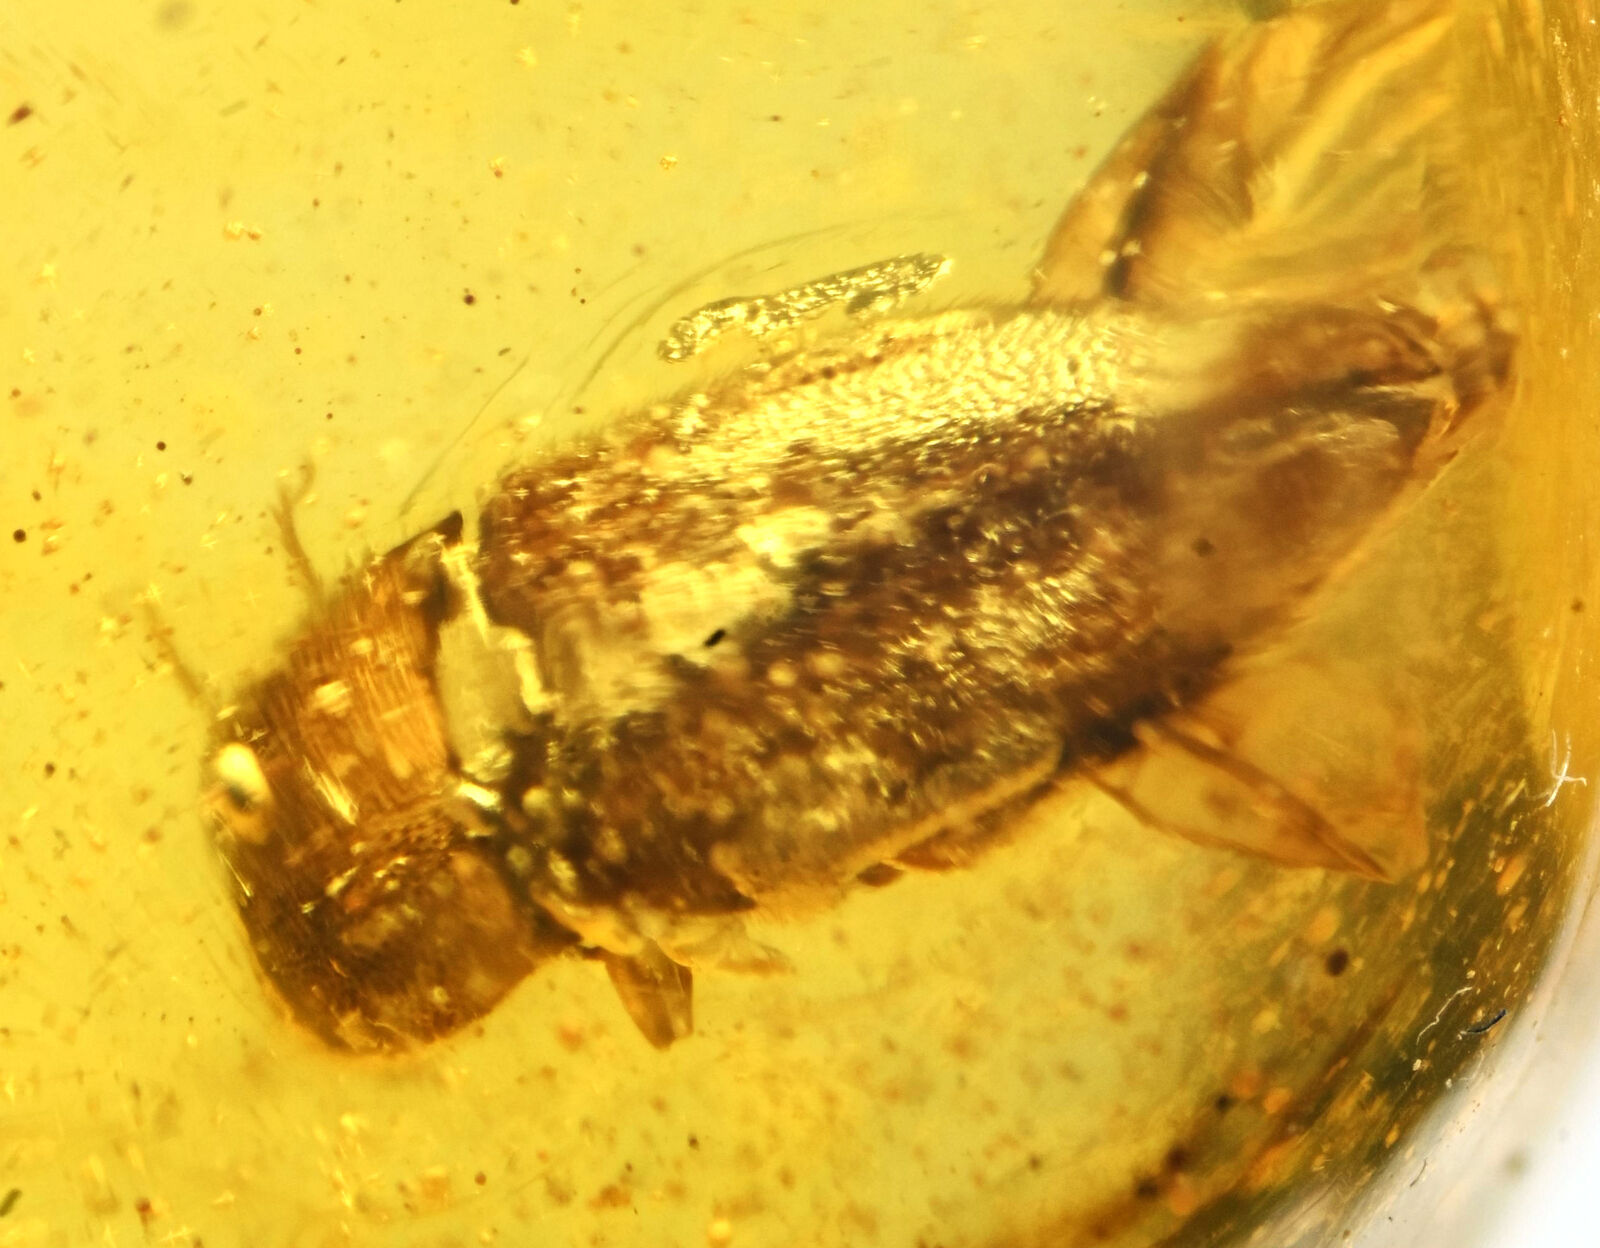 Coleoptera (Beetle), Fossil Inclusion in Dominican Amber